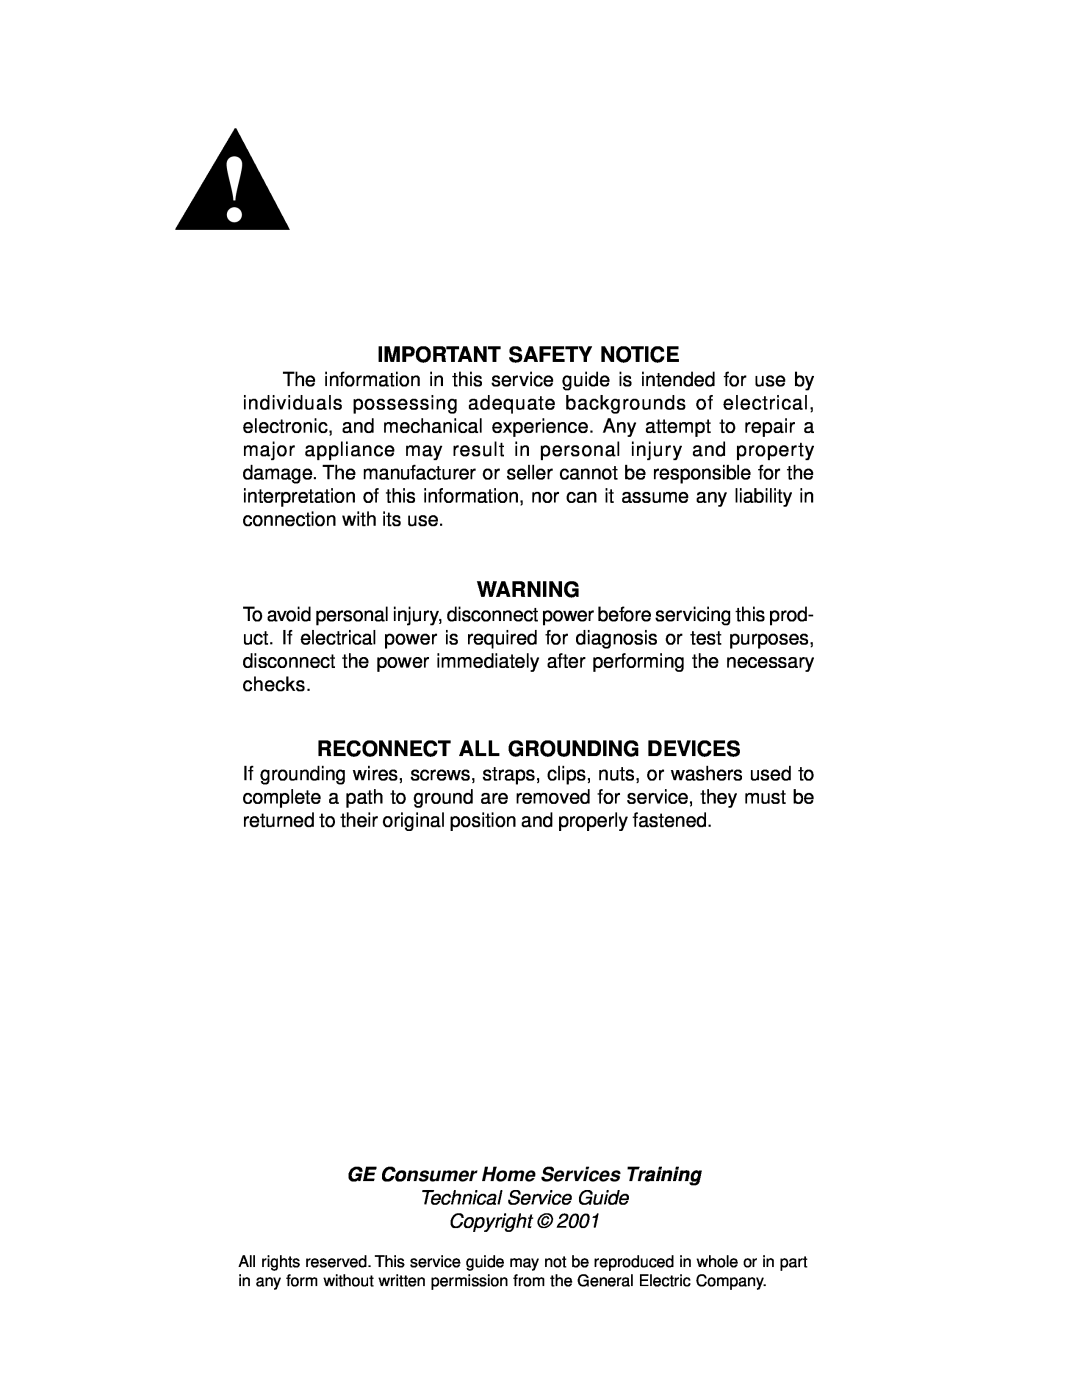 GE GSD6600, PDW7300, PDW7700 Important Safety Notice, Reconnect All Grounding Devices, Technical Service Guide Copyright 